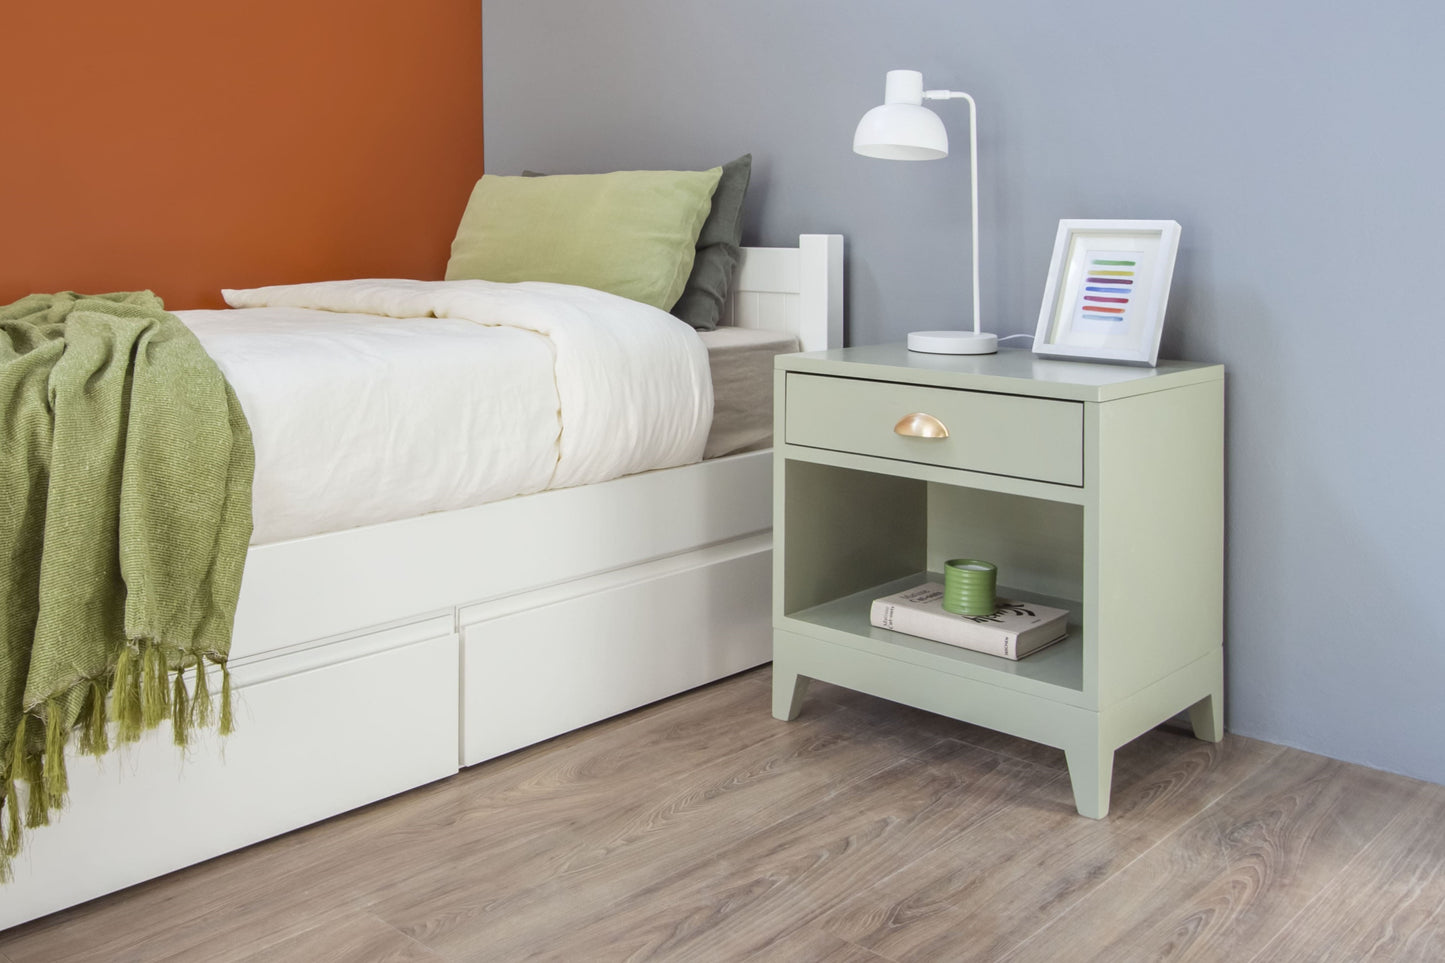 Hydra bed side table - The Room